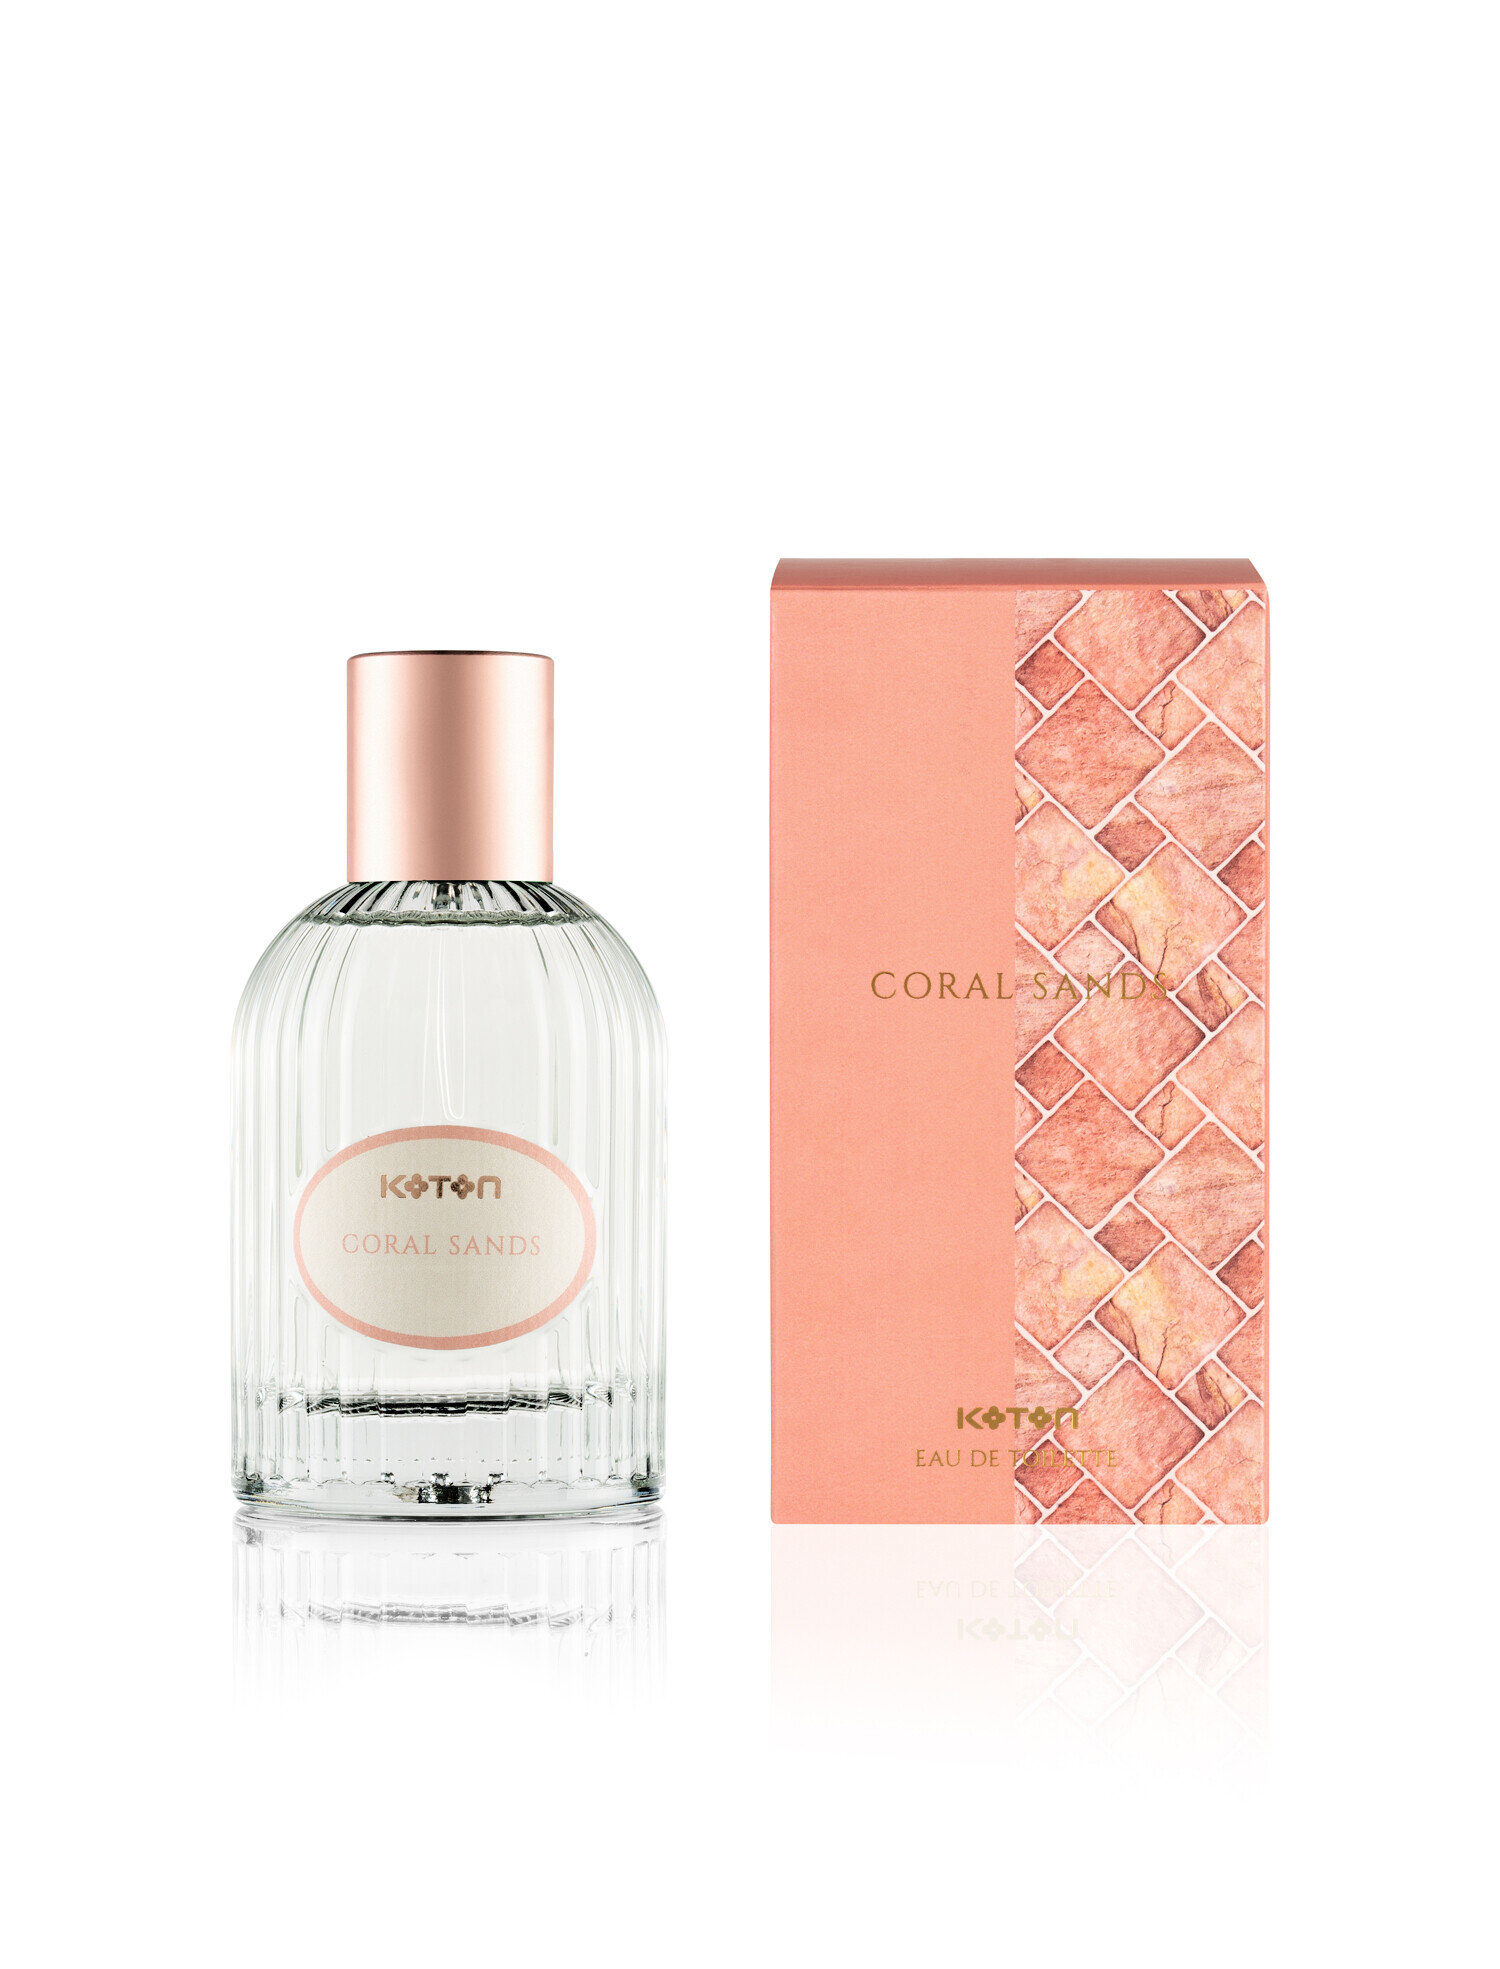 Signature Zoom Oriflame ماء كولونيا A Fragrance للرجال 2015